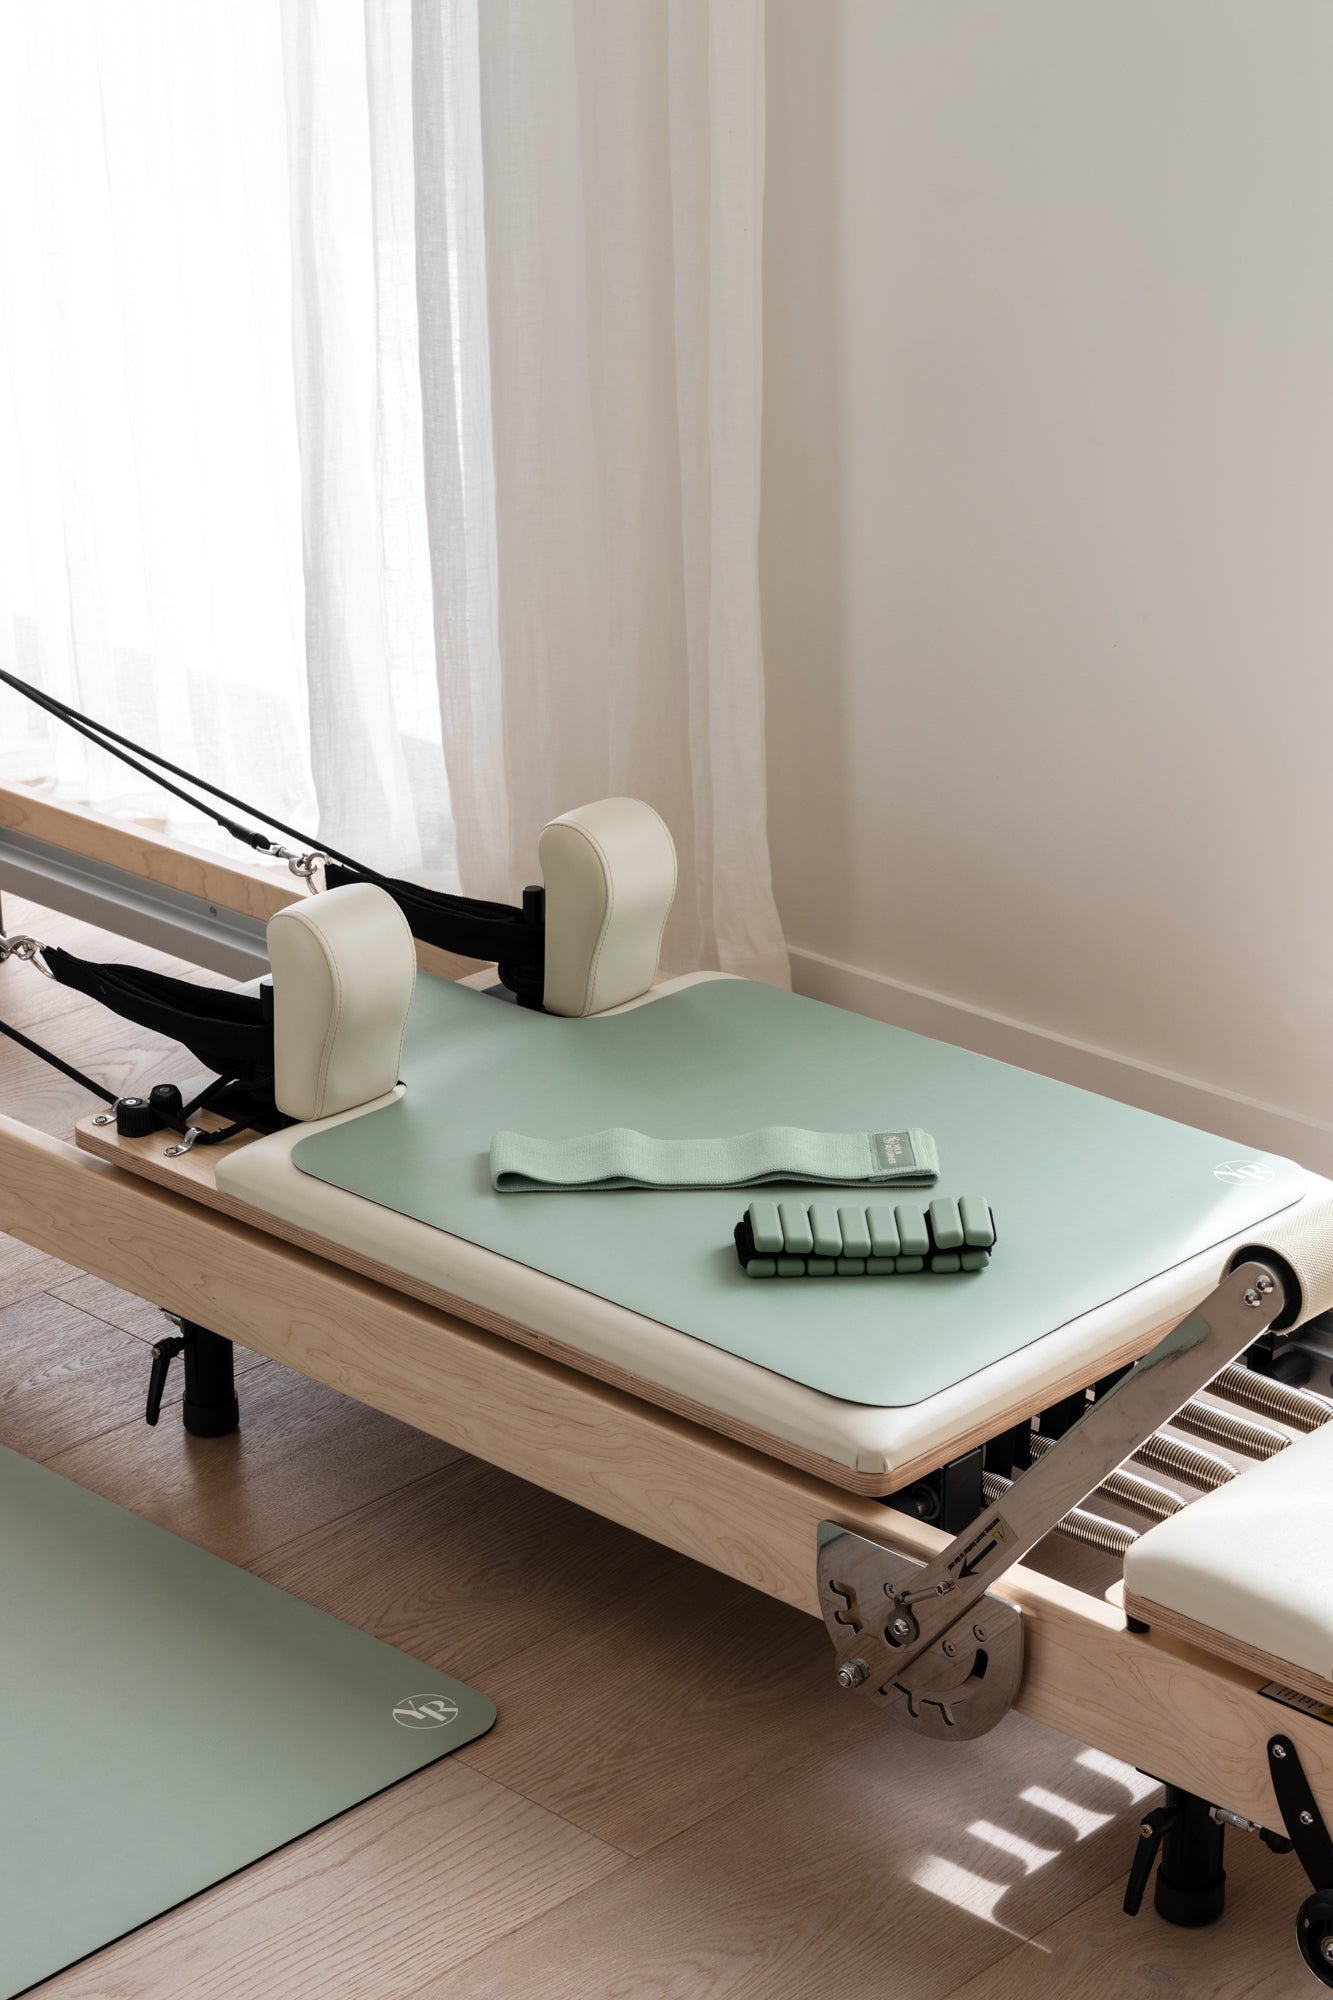 Accessories – Your Reformer